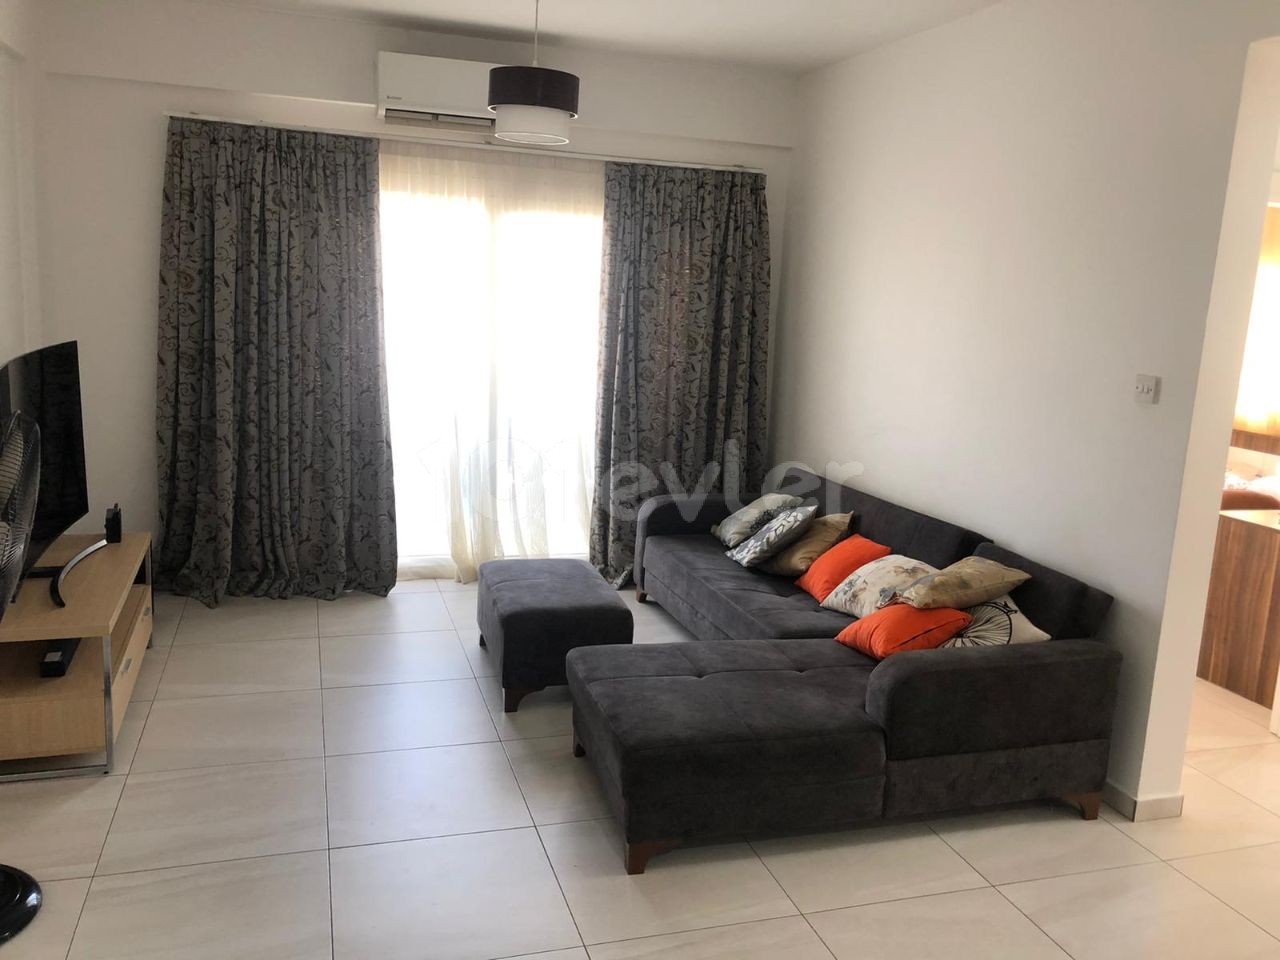 2+1 apartment for rent near Dumlupinar magusa mr pounda 2+1 apartment for rent will be vacant at the end of January 4000$ rent per year 400$ deposit 300$ maintenance fee and commission